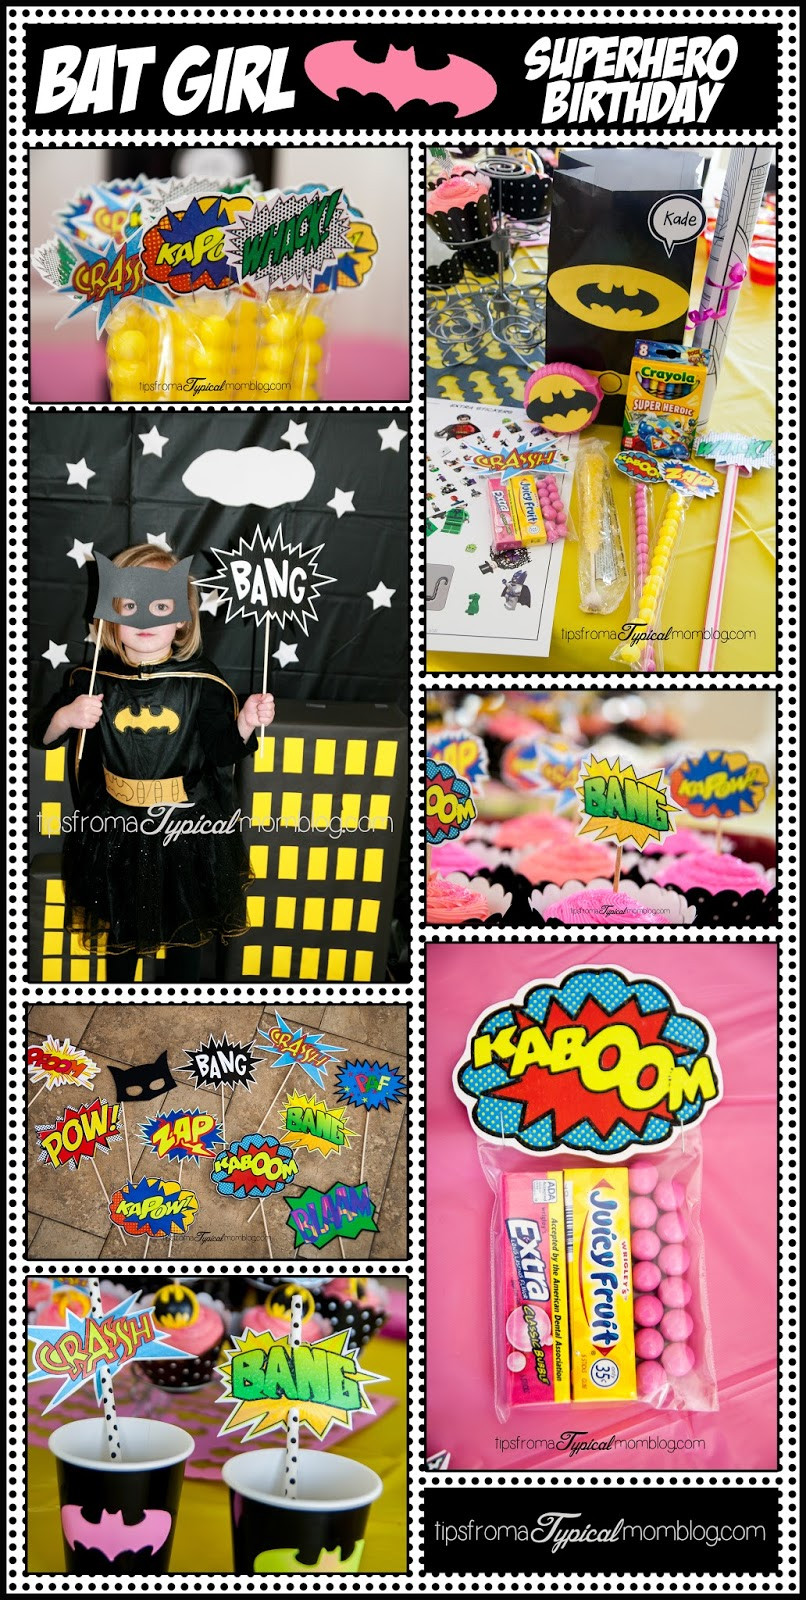 Free Birthday Party Printables Decorations
 Superhero Girl Birthday Party Ideas and Free Printables